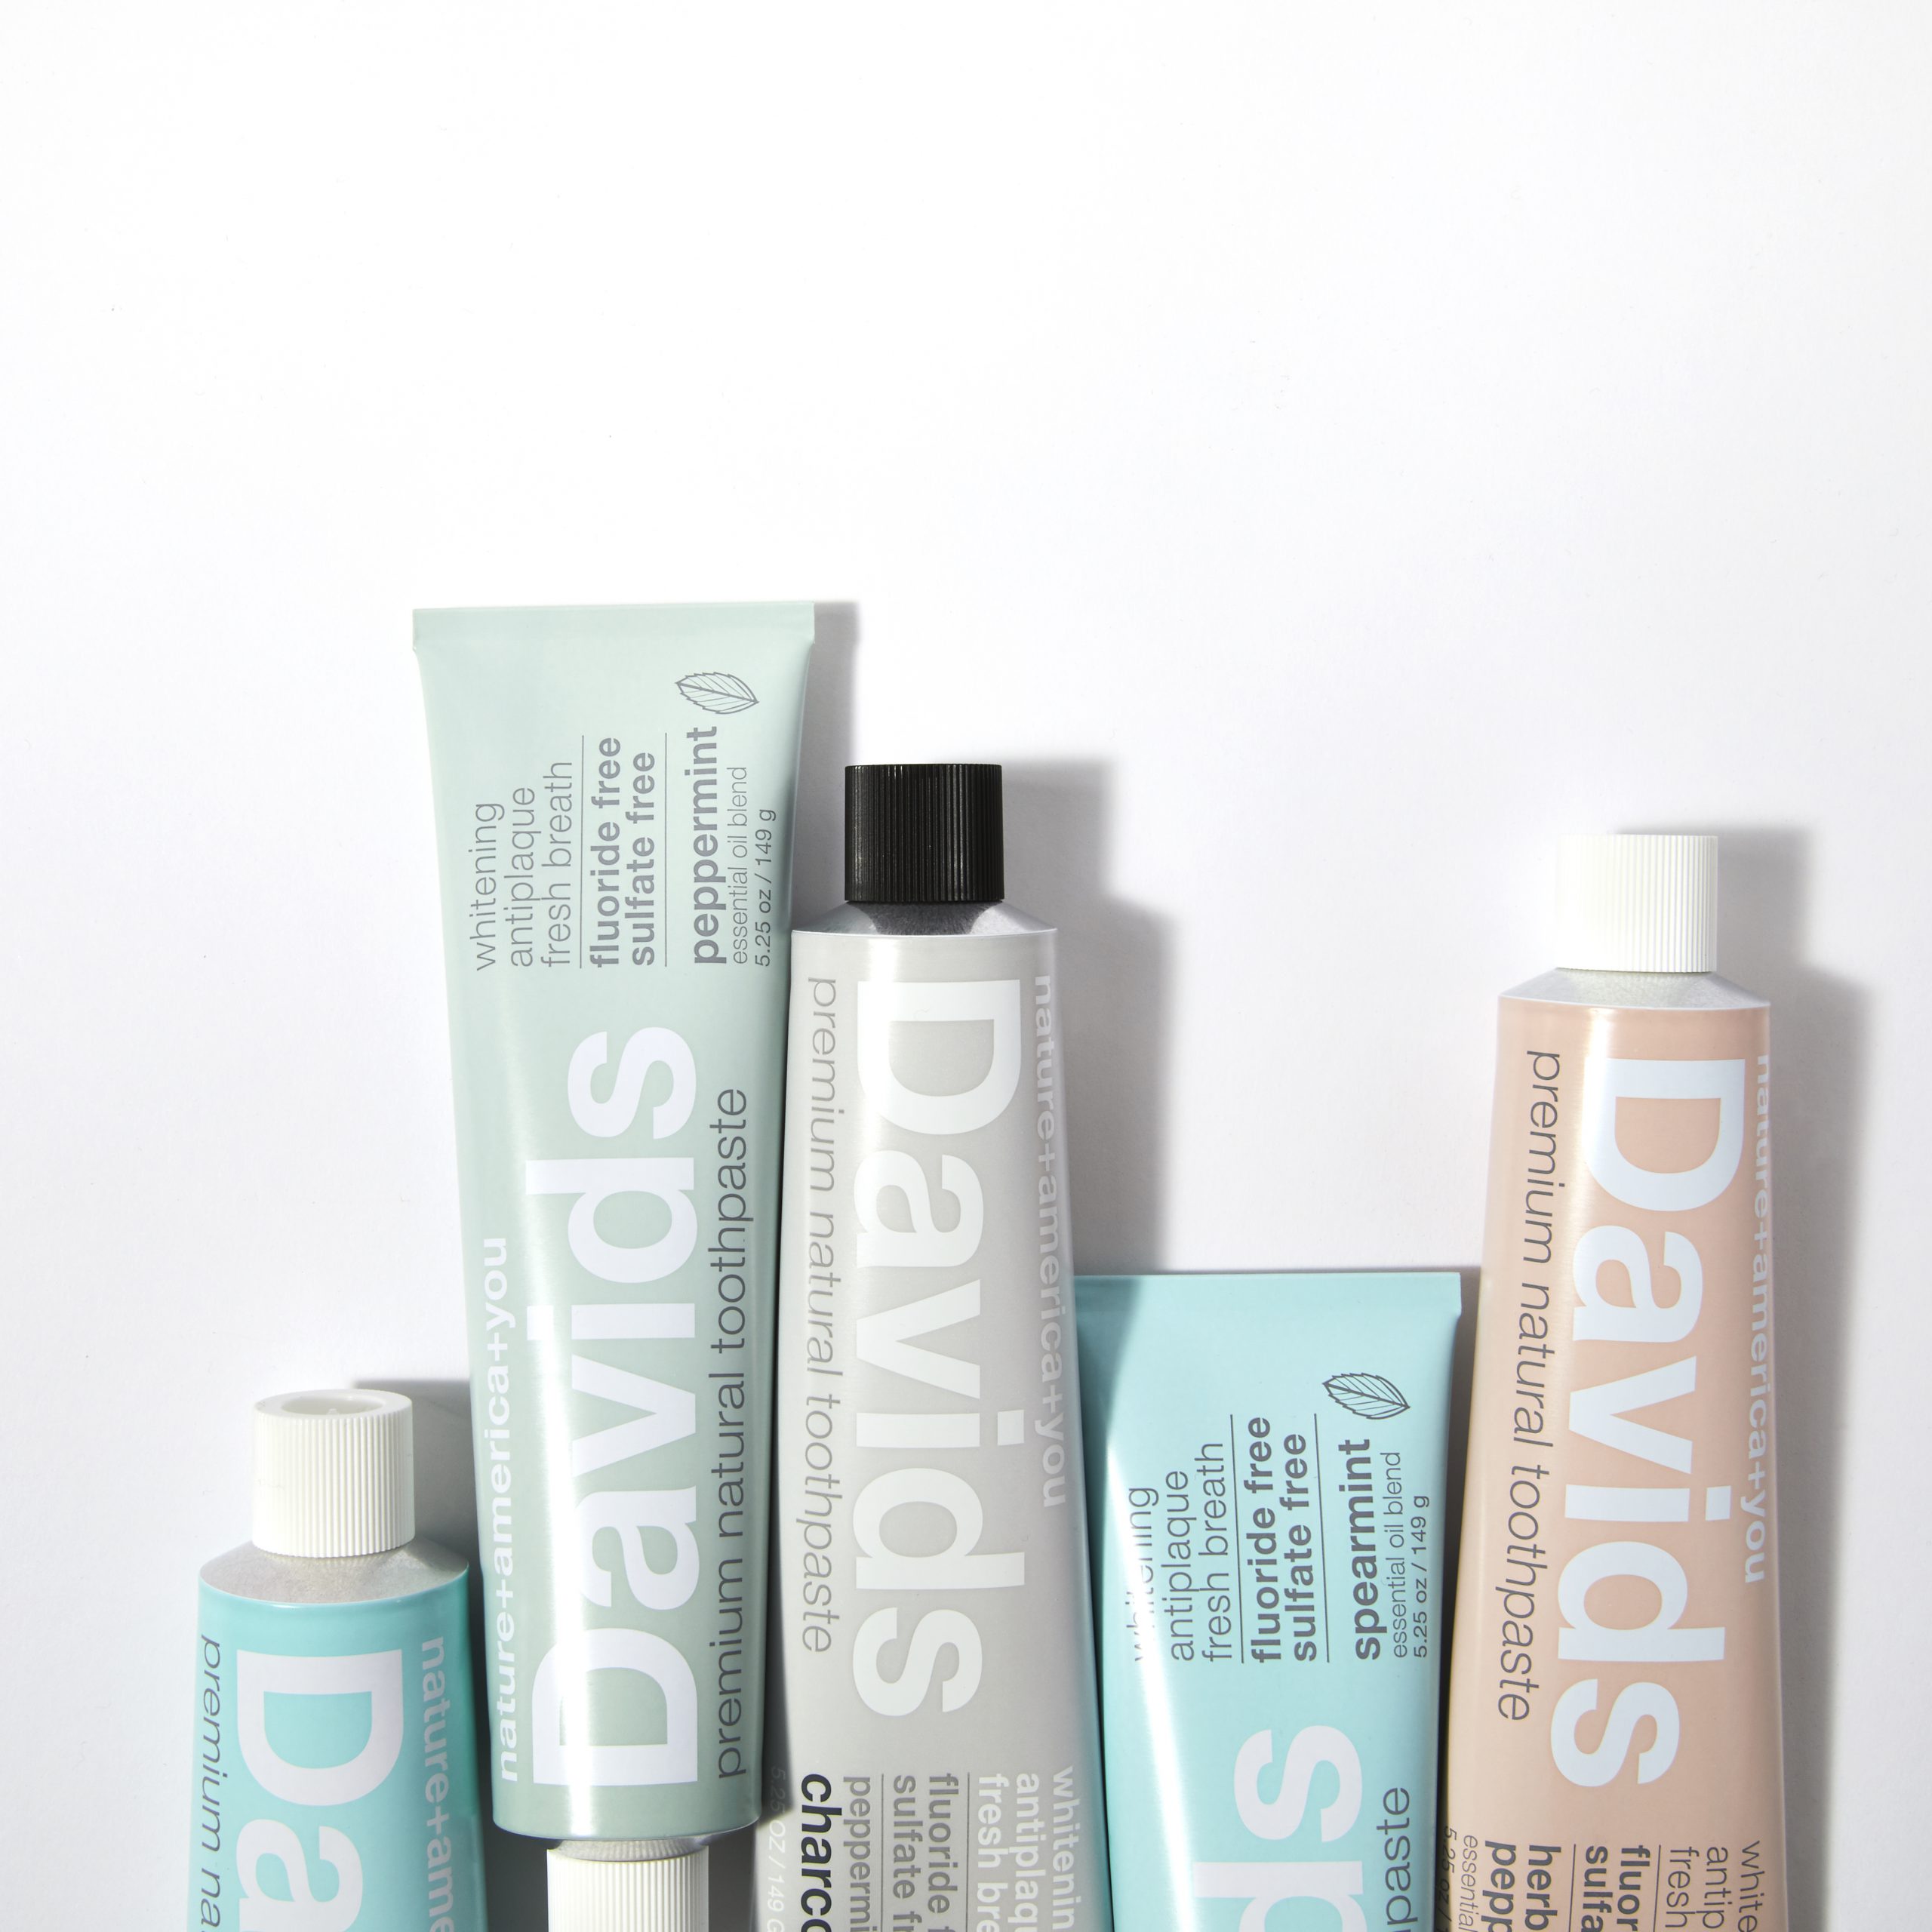 Whiten Teeth, Fight Plaque, and Freshen Breath with Davids Premium Natural Toothpaste